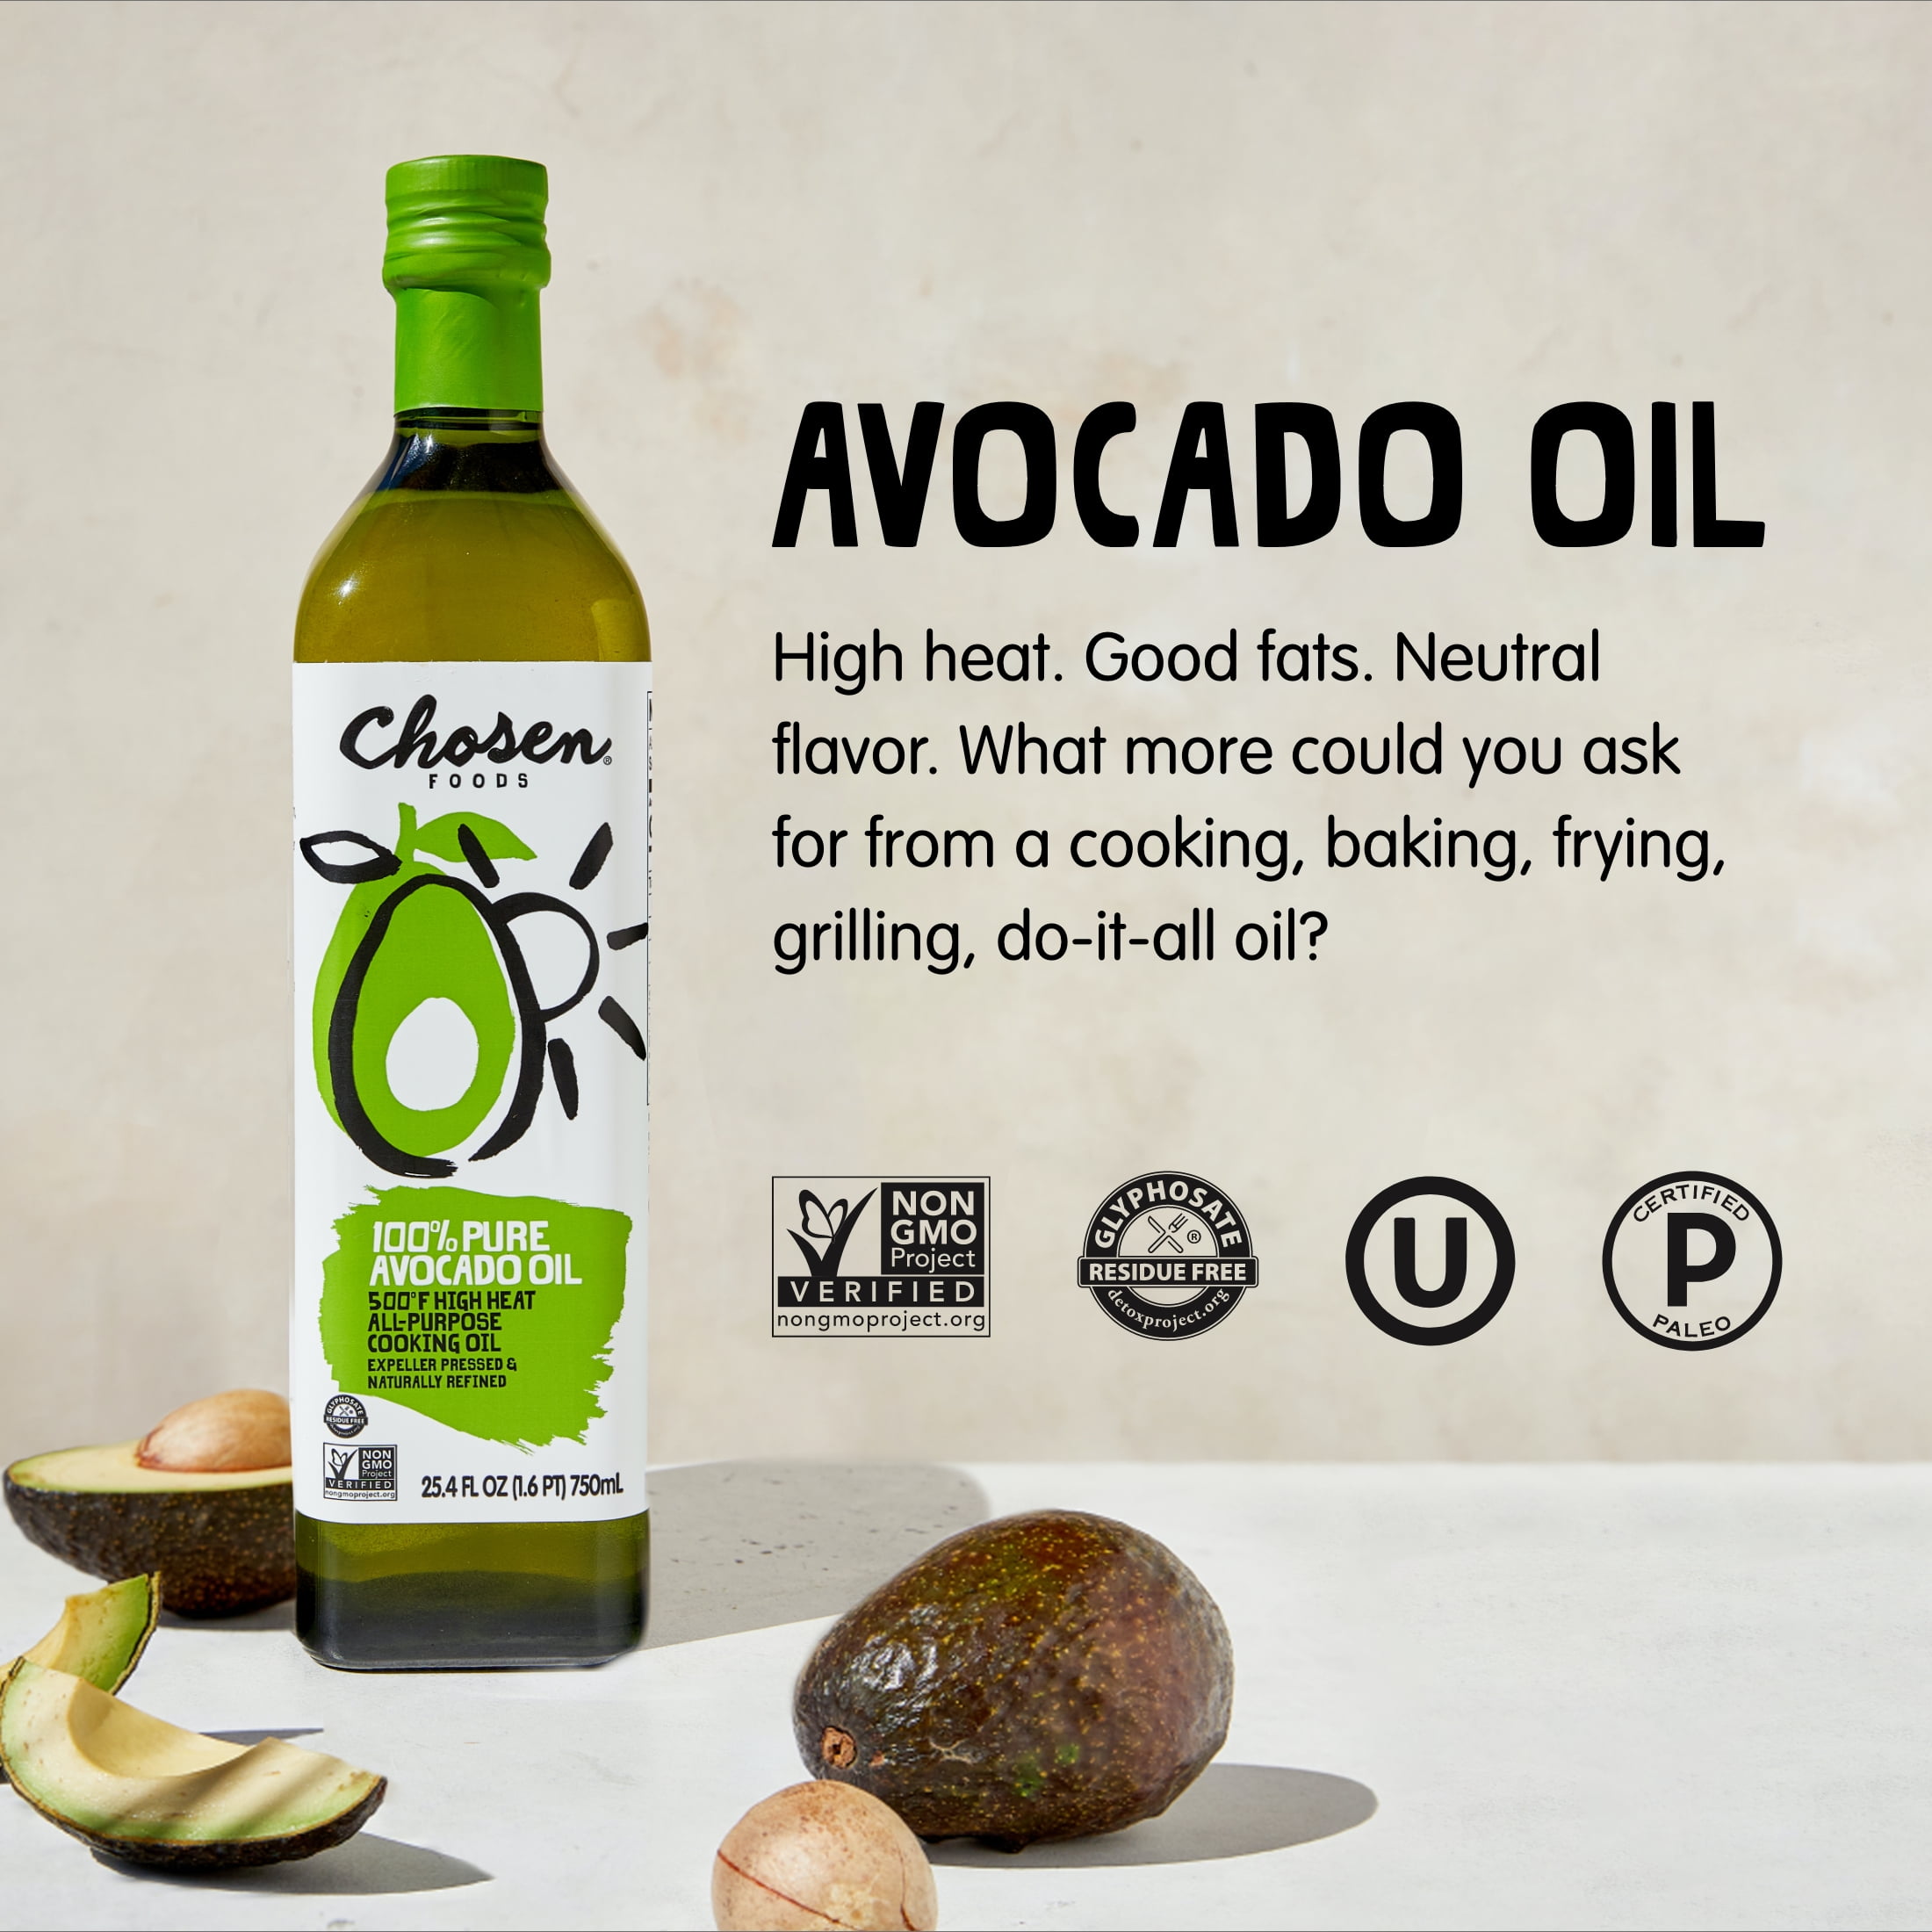 100% Pure Avocado Oil for Cooking | Chosen Foods